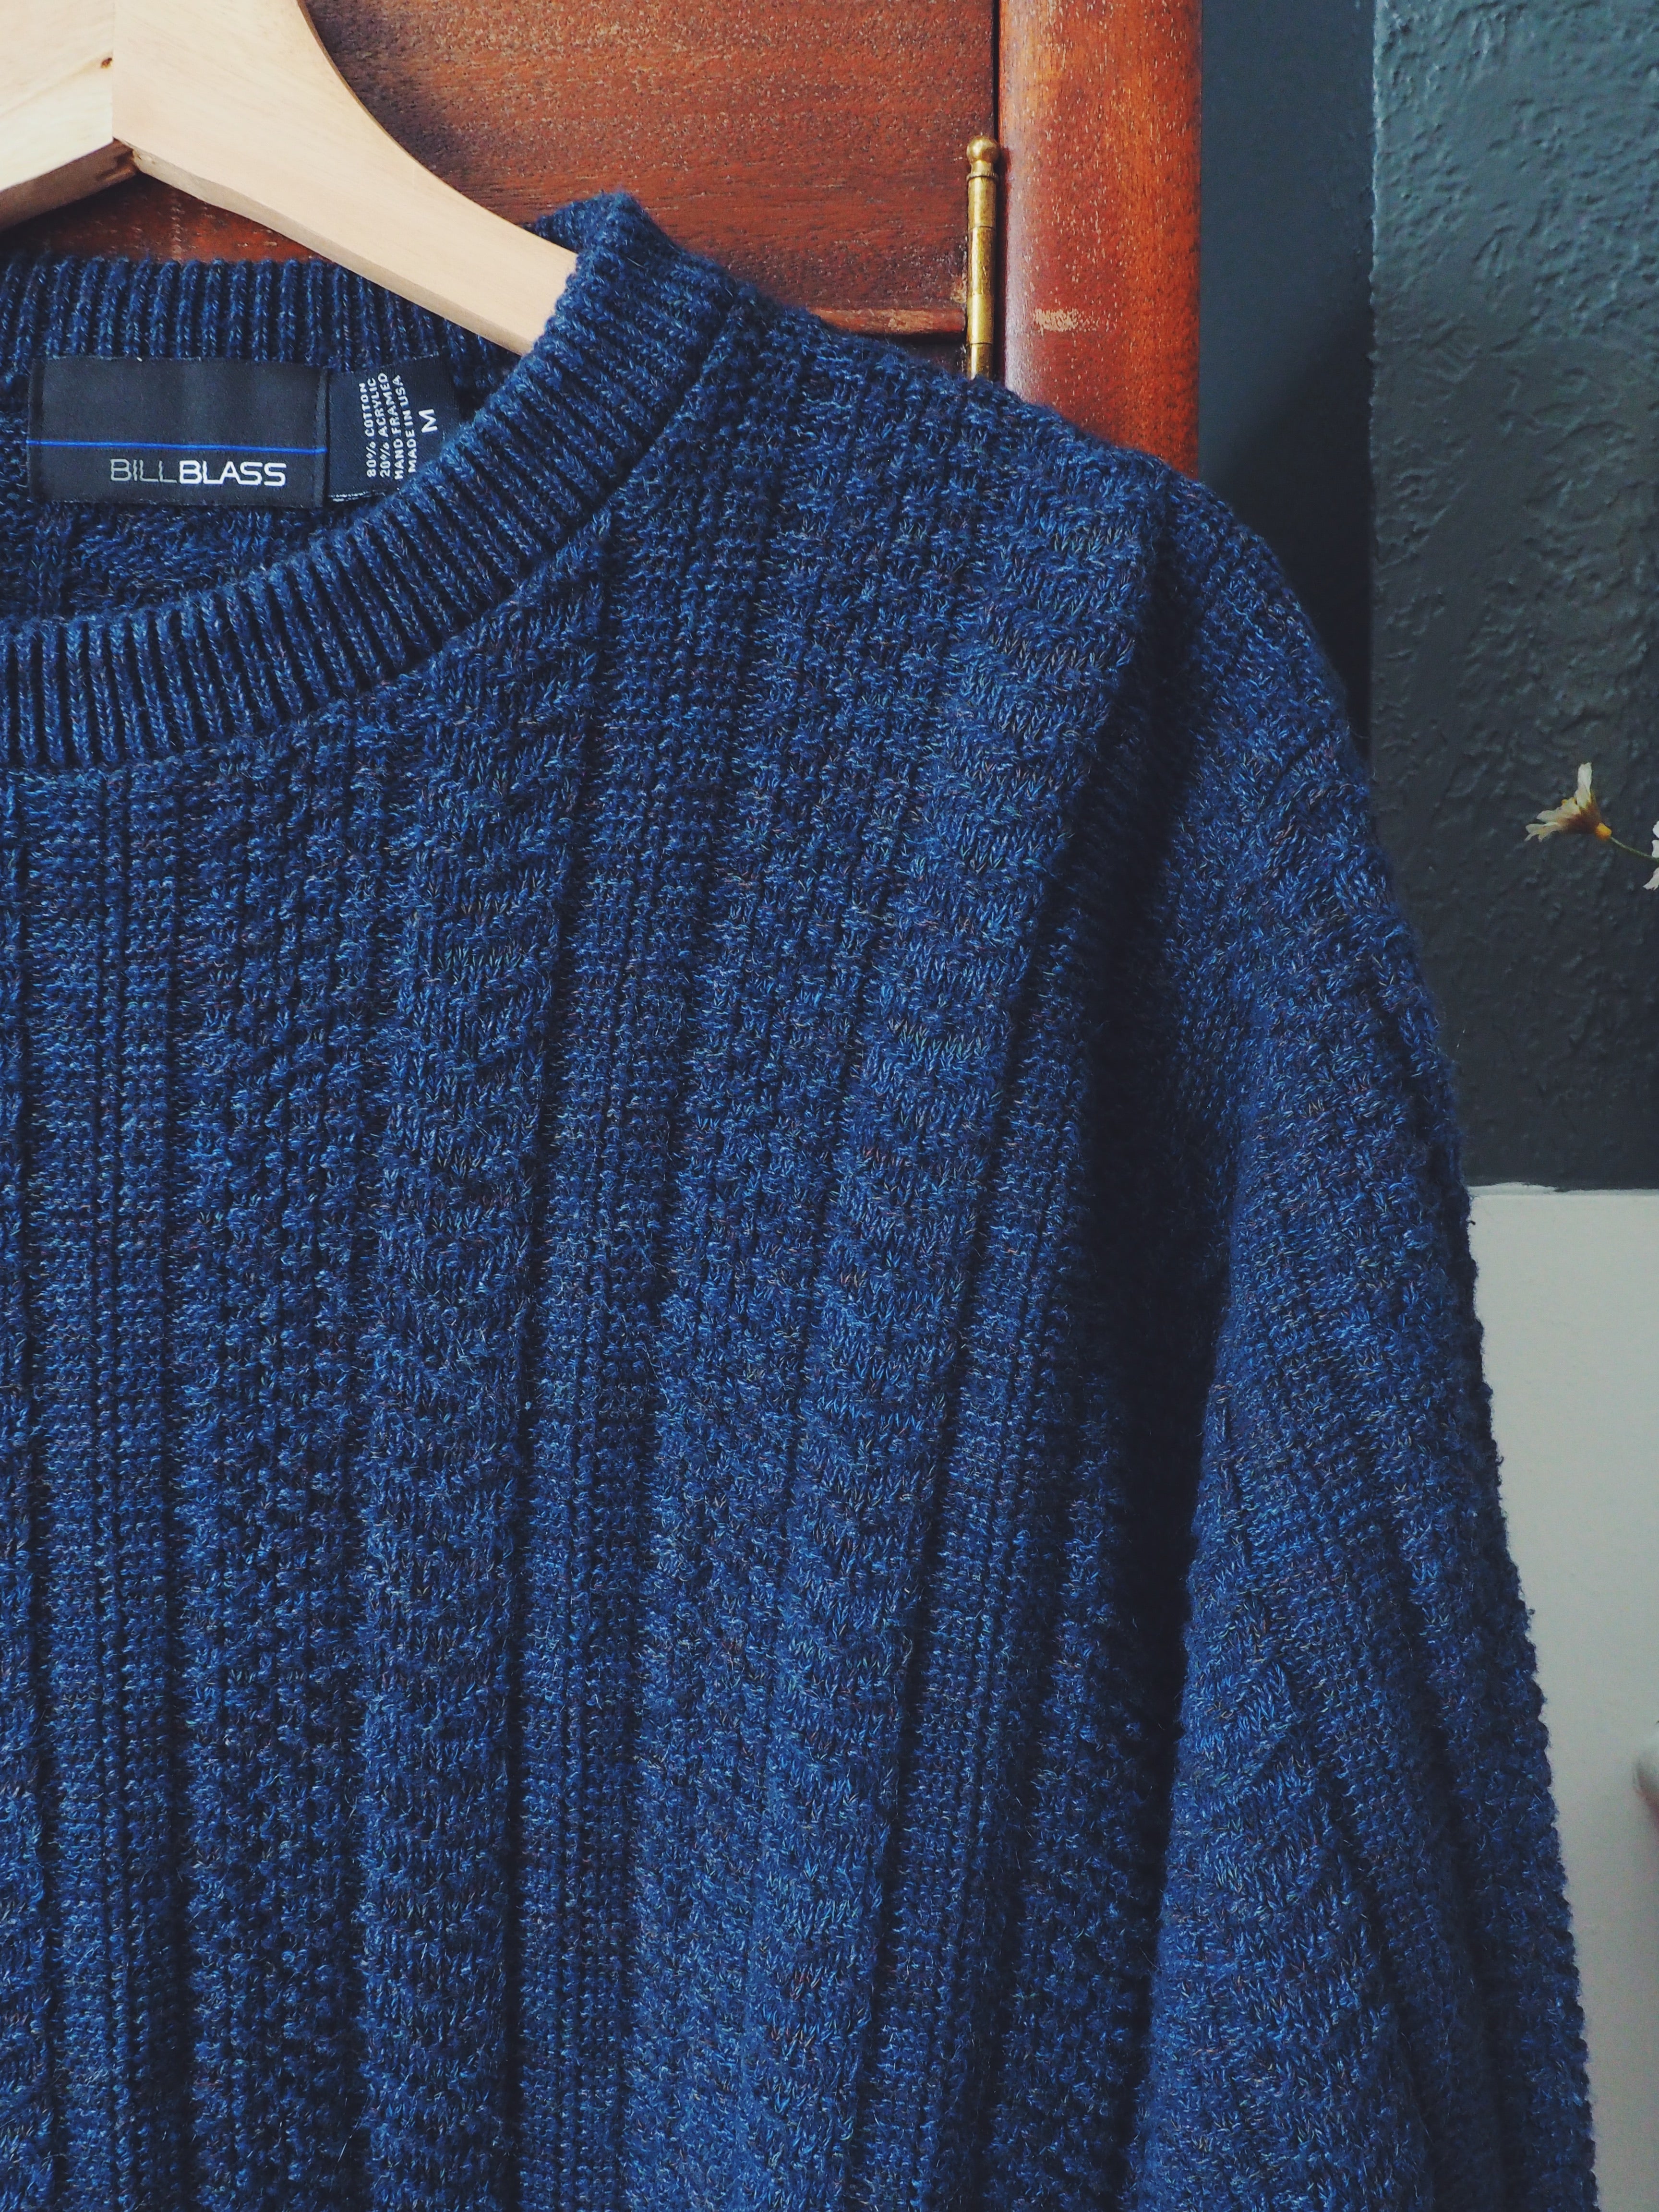 90s Men's Navy Cable-Knit Sweater